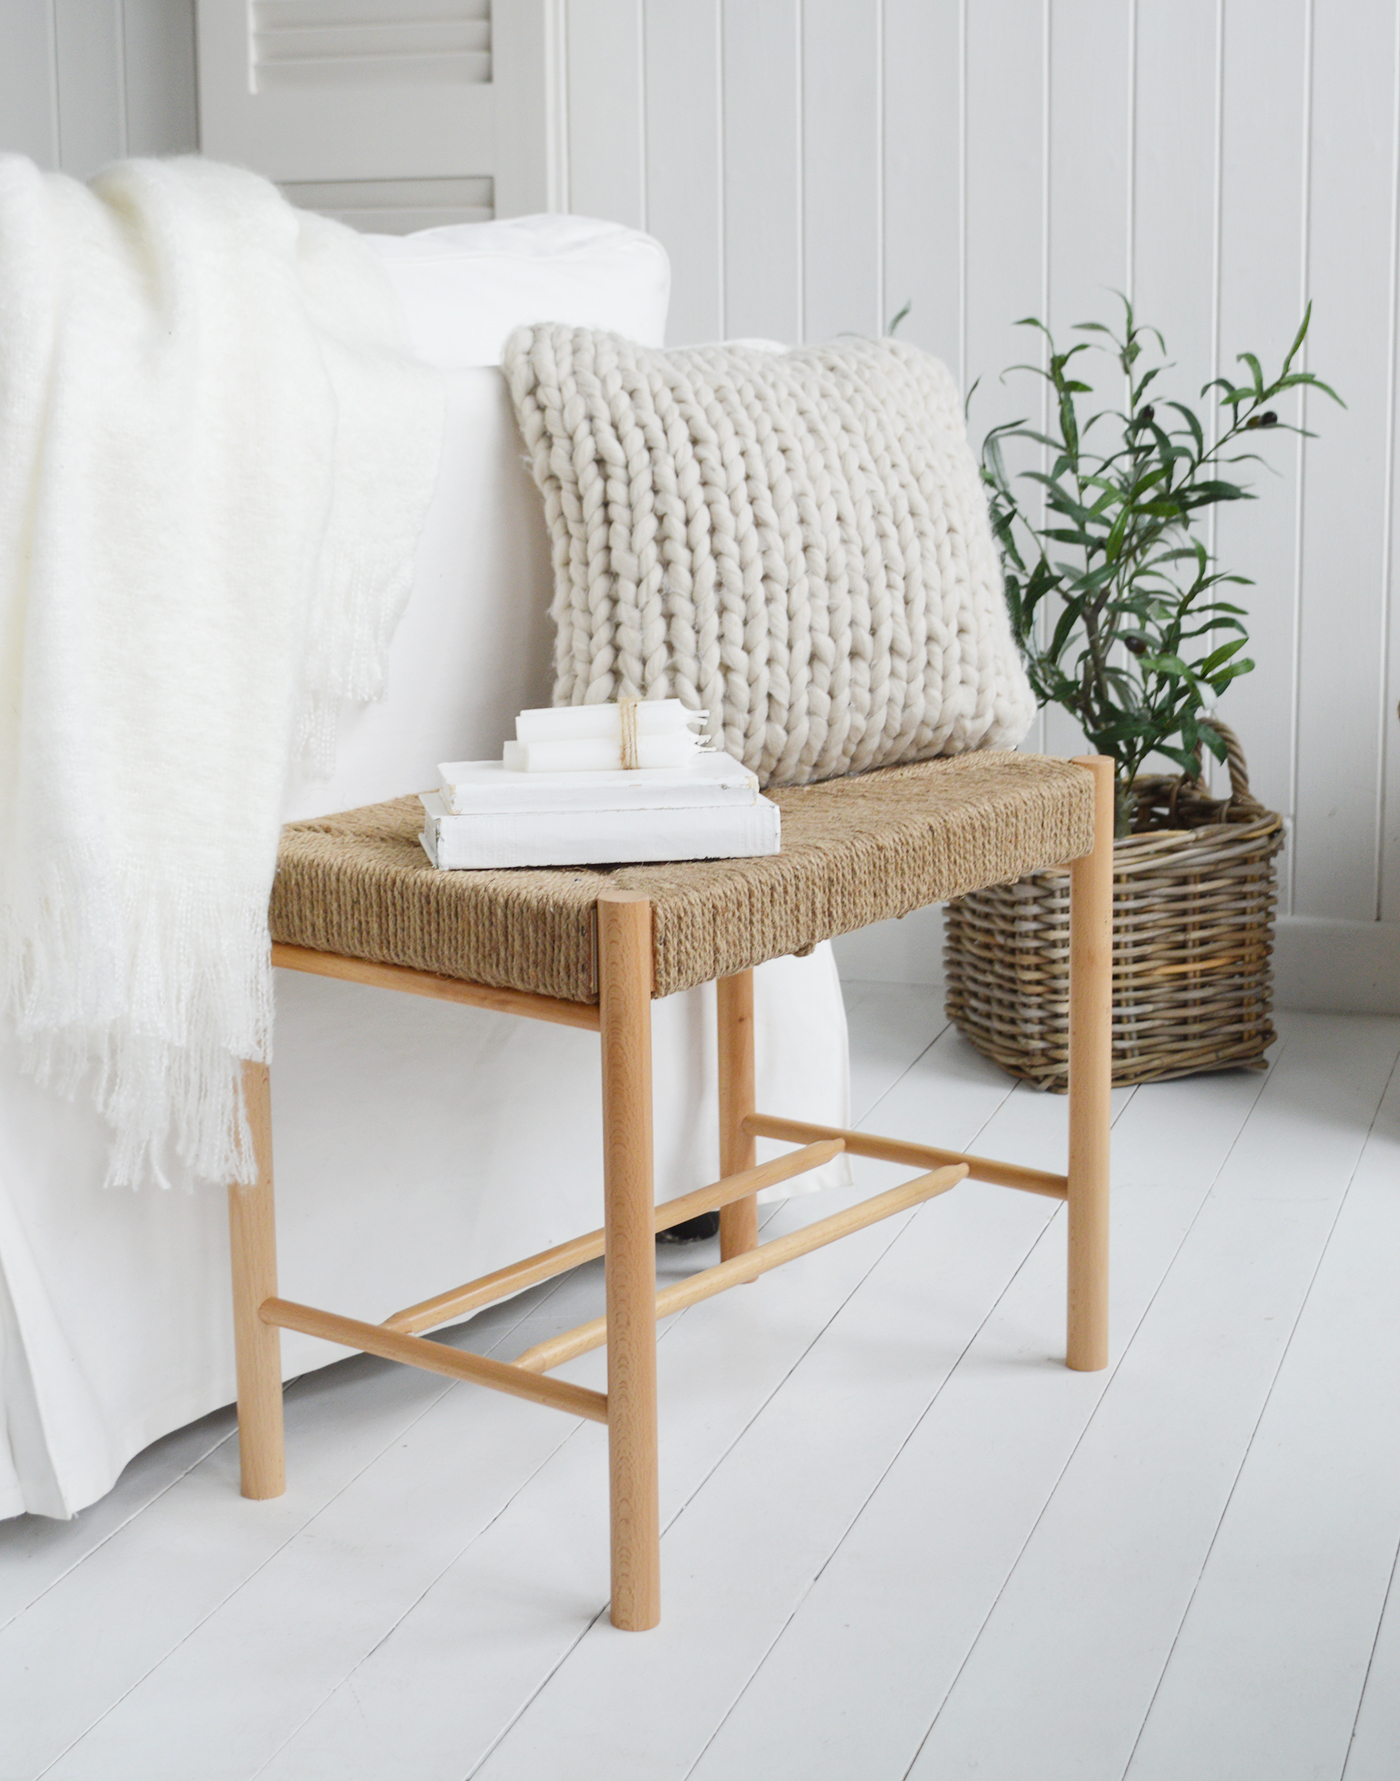 The Wakefield woven bench, can be used as a decorative accent in a room. Placing it against a wall or under a window can create a cozy reading nook or a visually appealing vignette. The woven texture can complement different decor styles, such as beach house, coastal, or rustic modern farmhouse